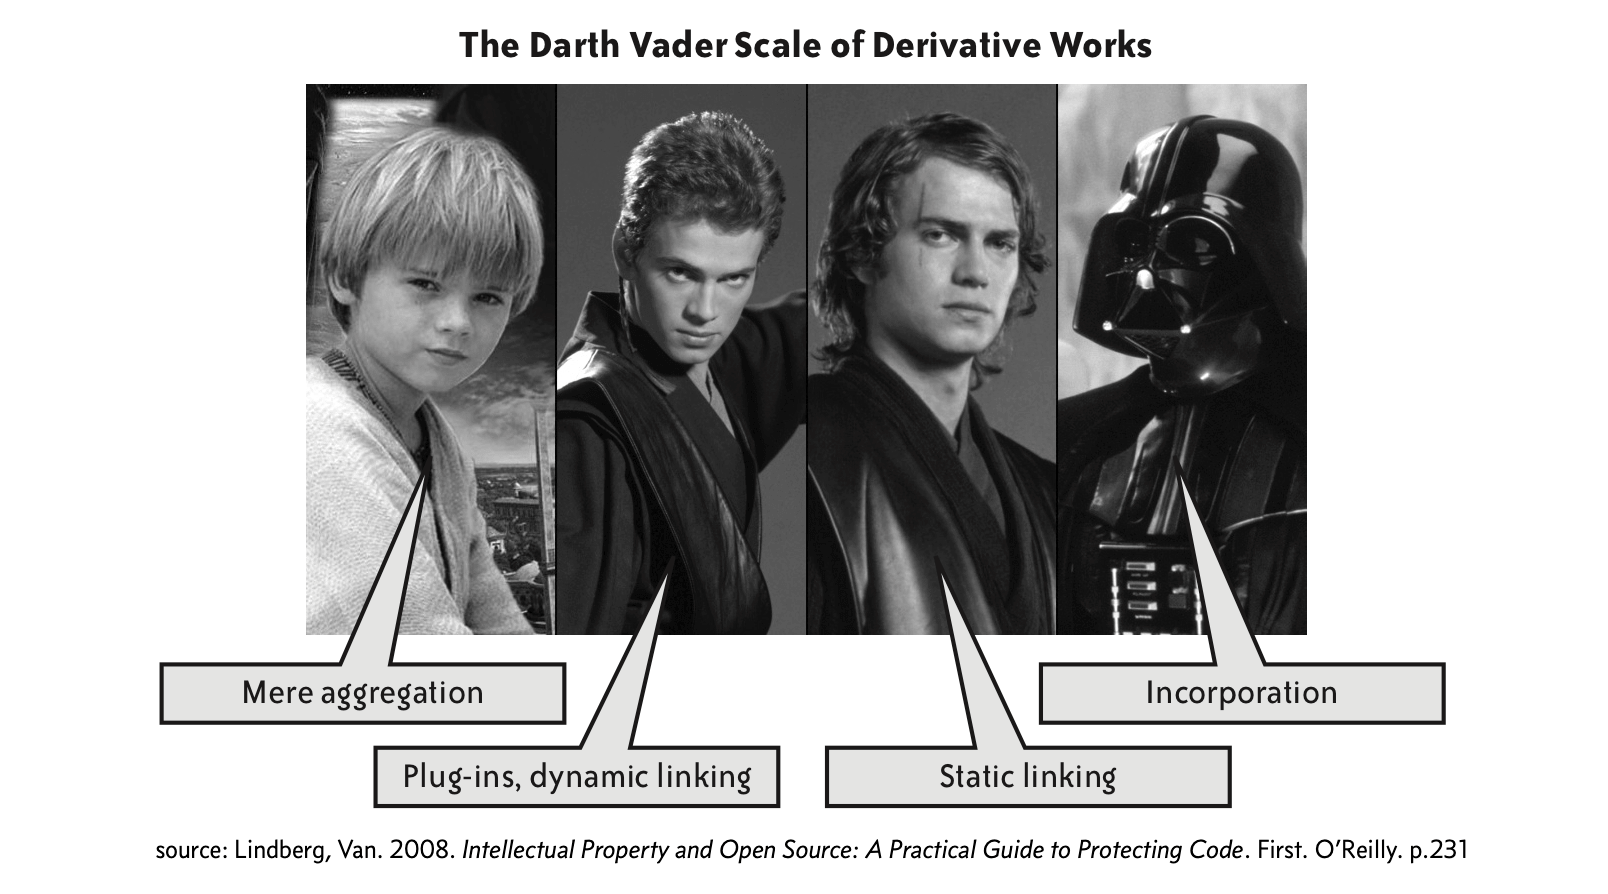 The Darth Vader Scale of Derivative Works: Young Anakin (circa Episode 1) is mere aggregation, older (but still young-ish) Anakin (Circa Episode 2) is plug-ins and dynamic linking, older still (circa Episode 3) is static linking, and full-blown Darth Vader is incorporation. Figure from Lindberg 2008.